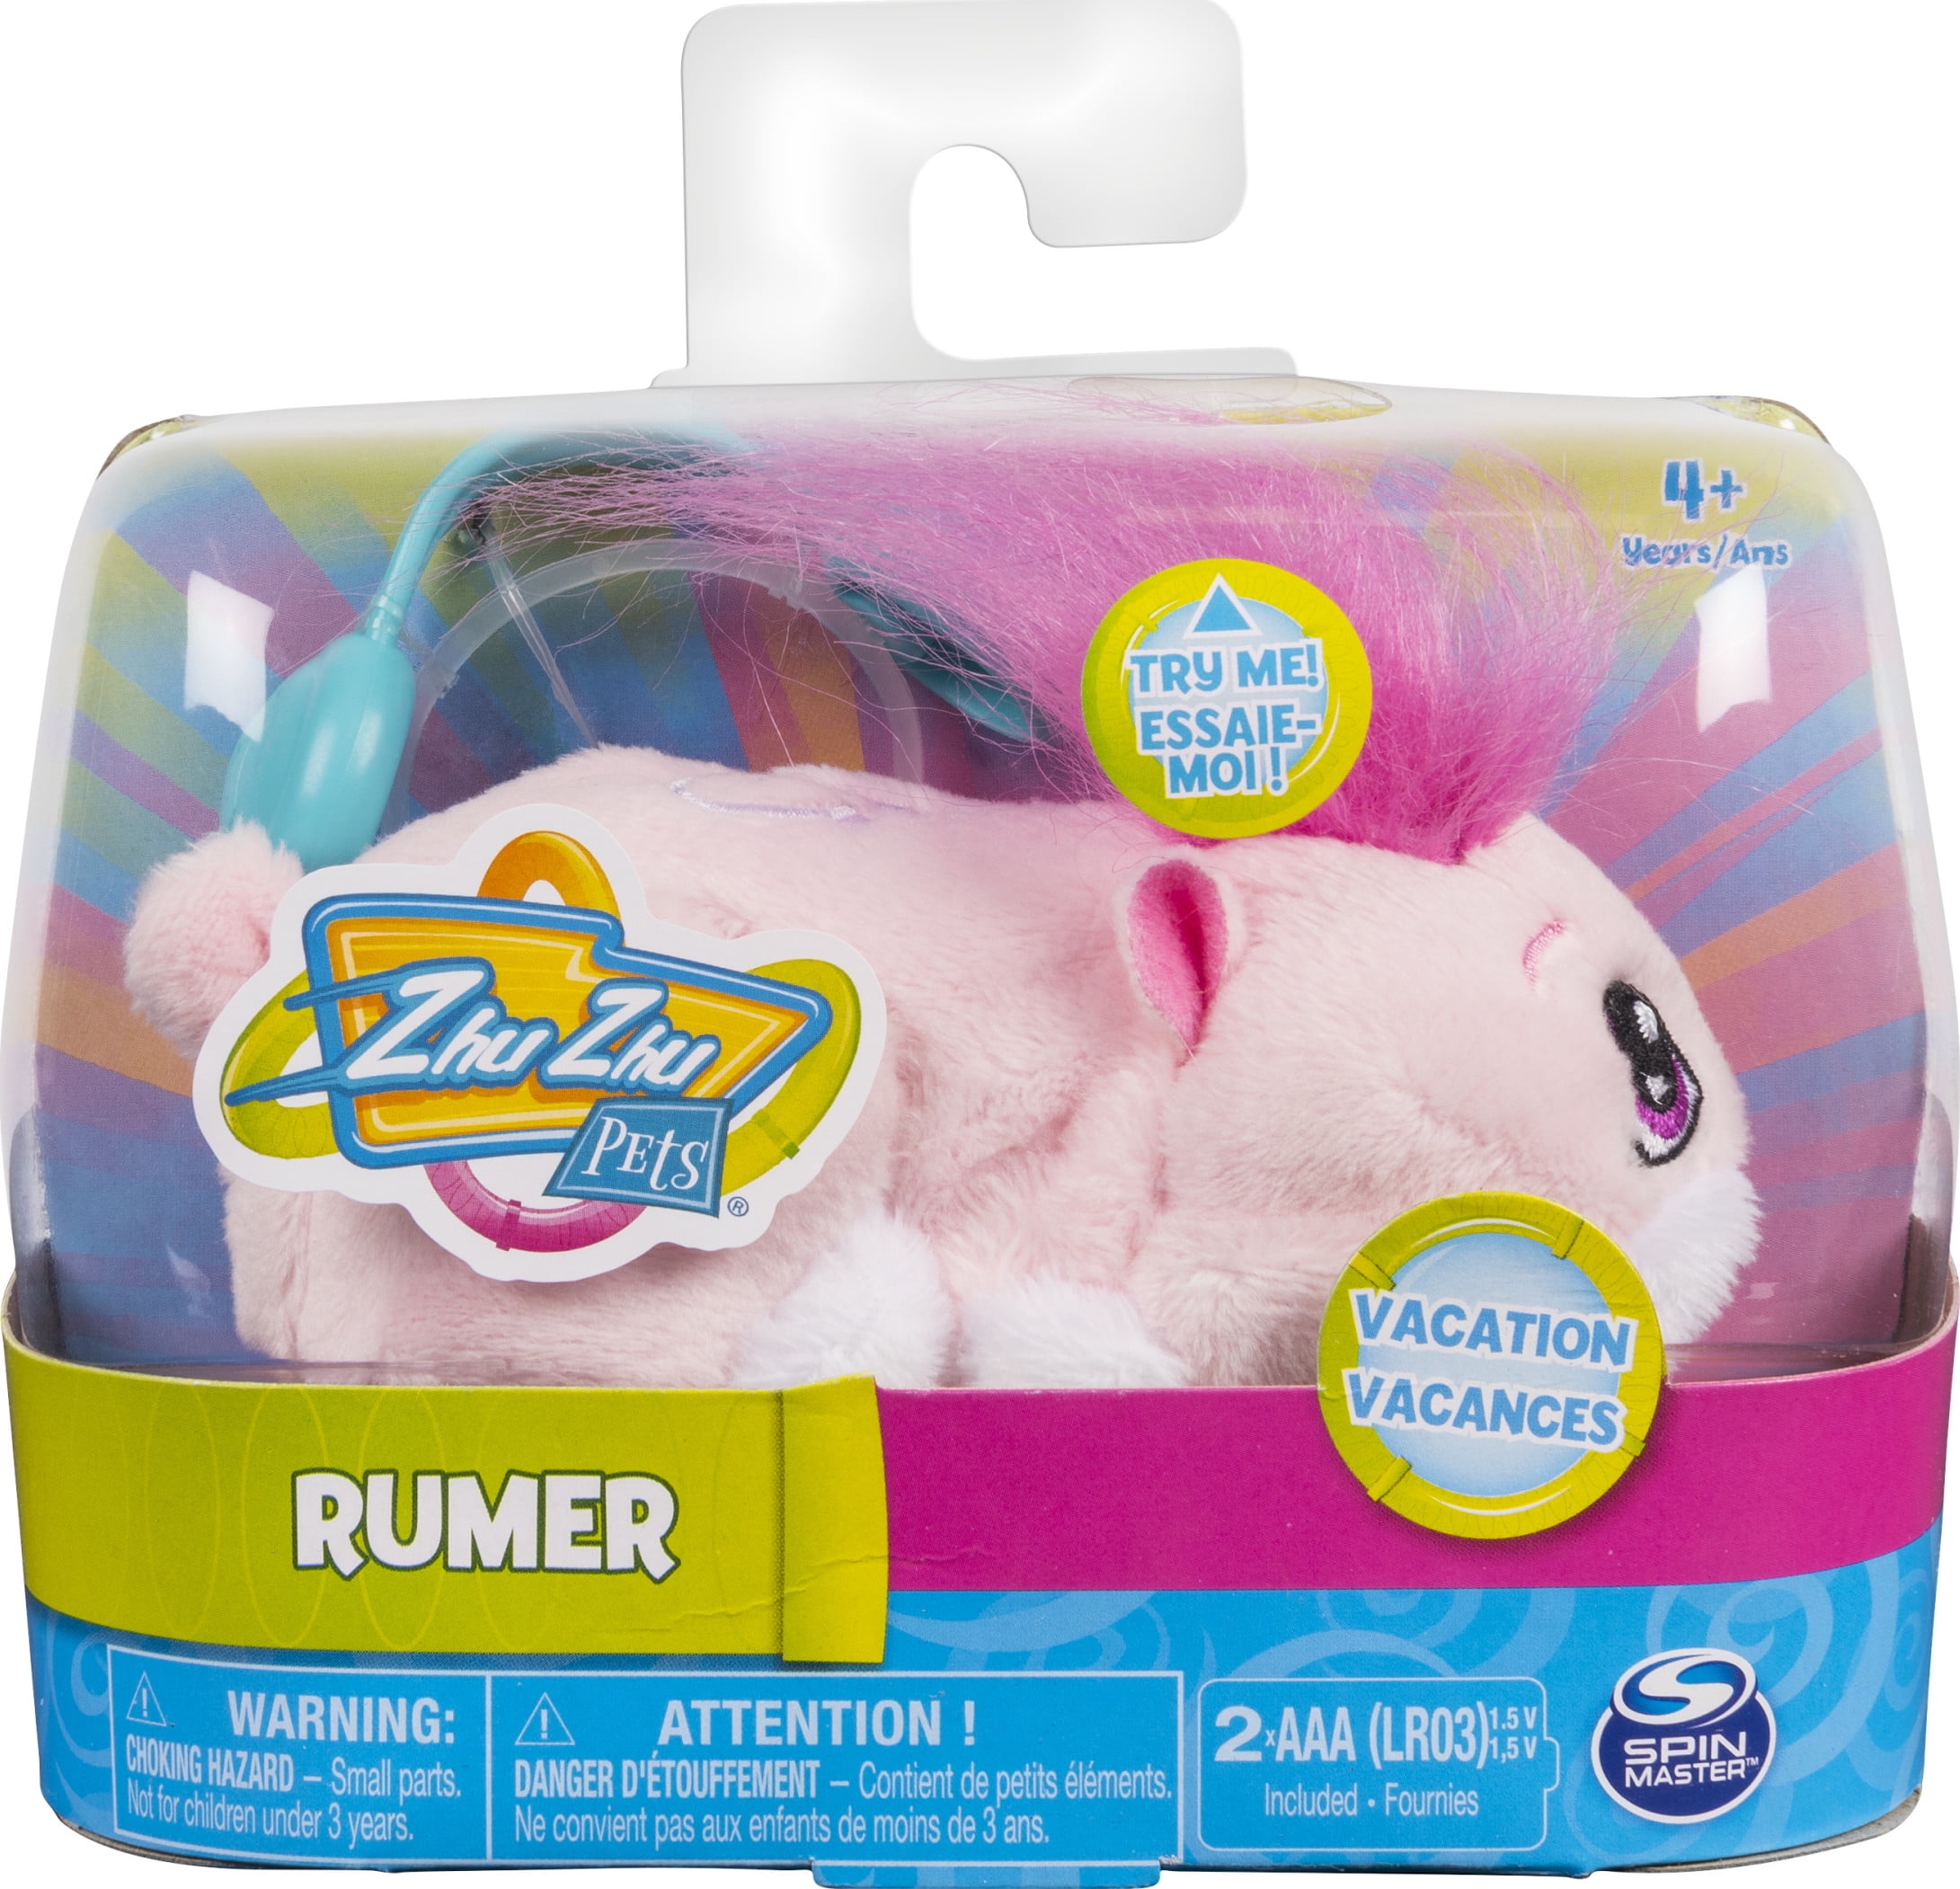 Birthday Party Pipsqueak Zhu Zhu Pets yellow and pink Hamster Toy with party hat 